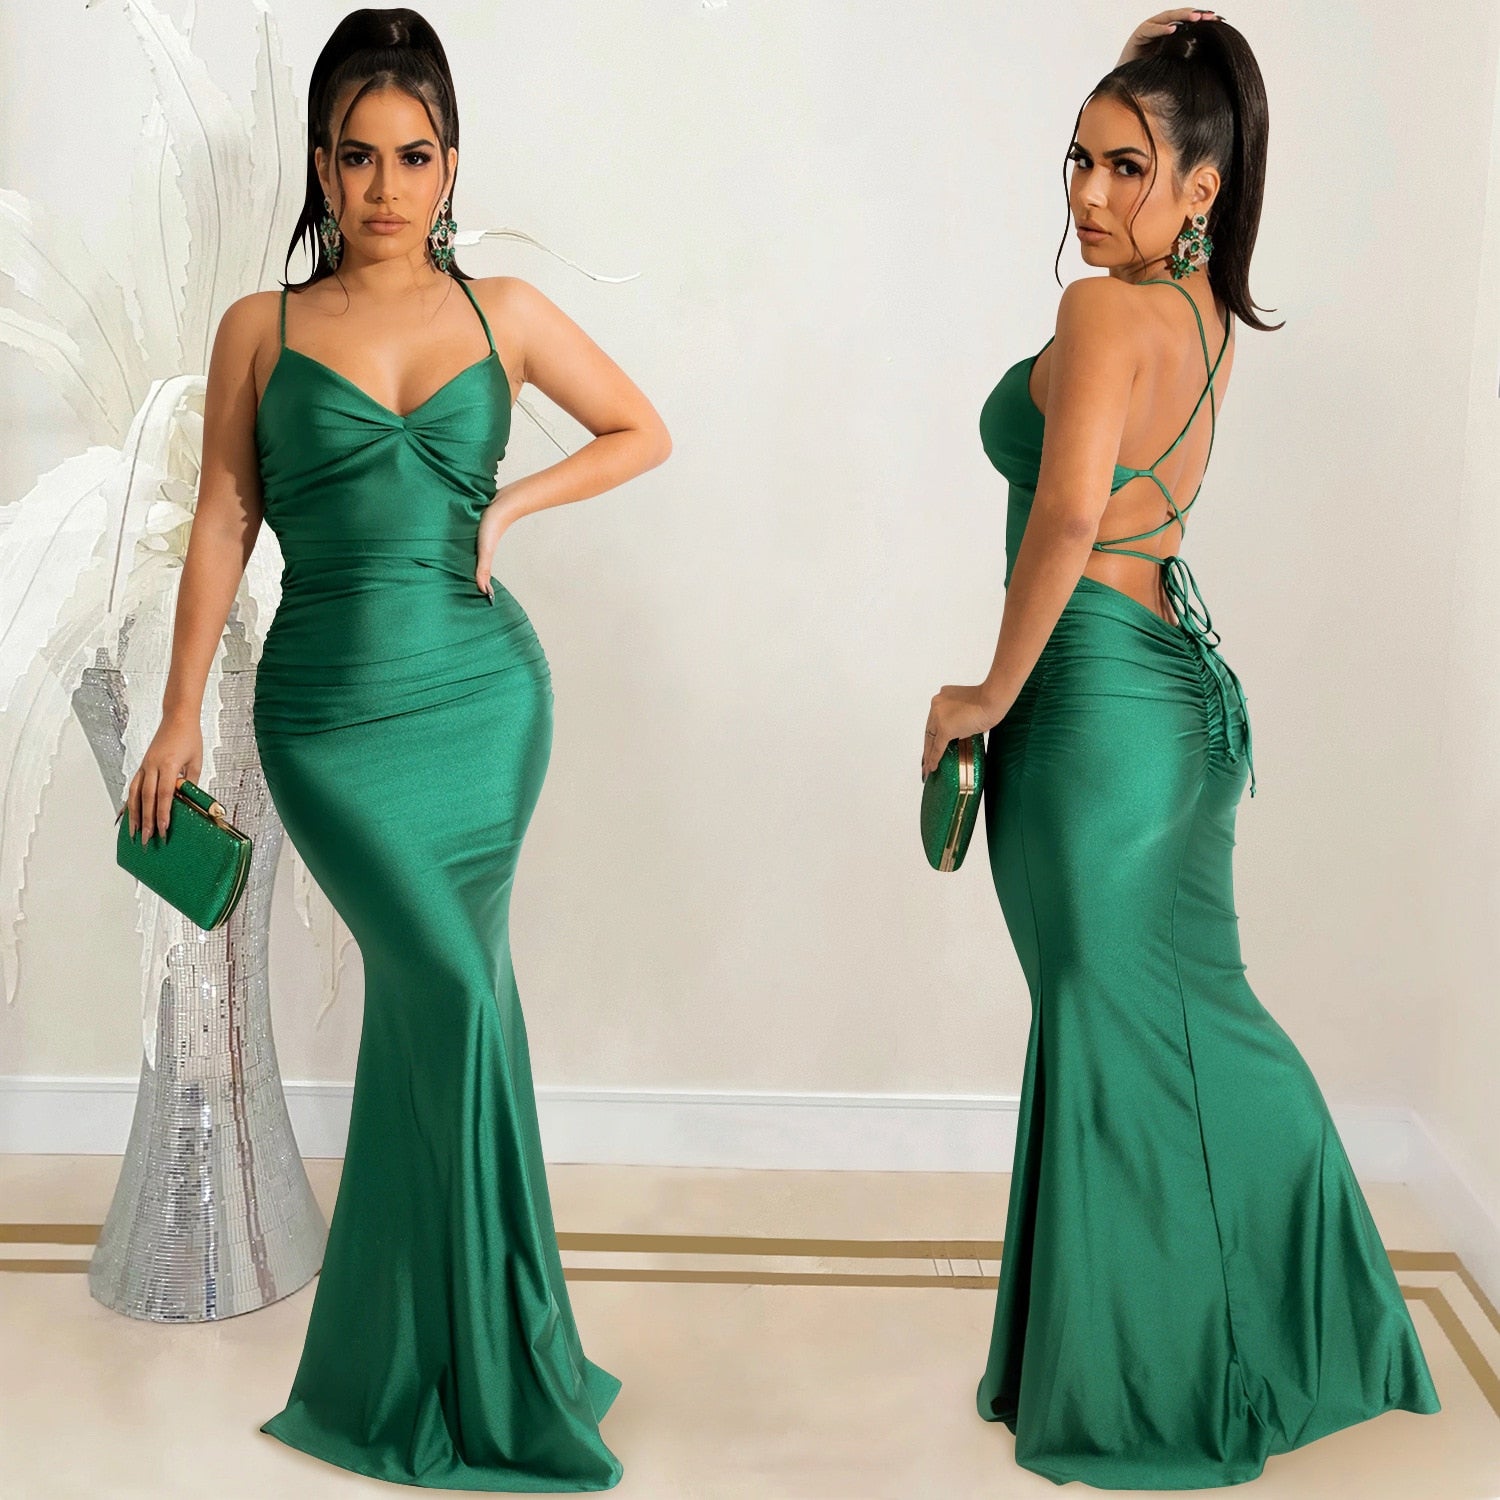 Ruched Backless Sexy Party Maxi Dress